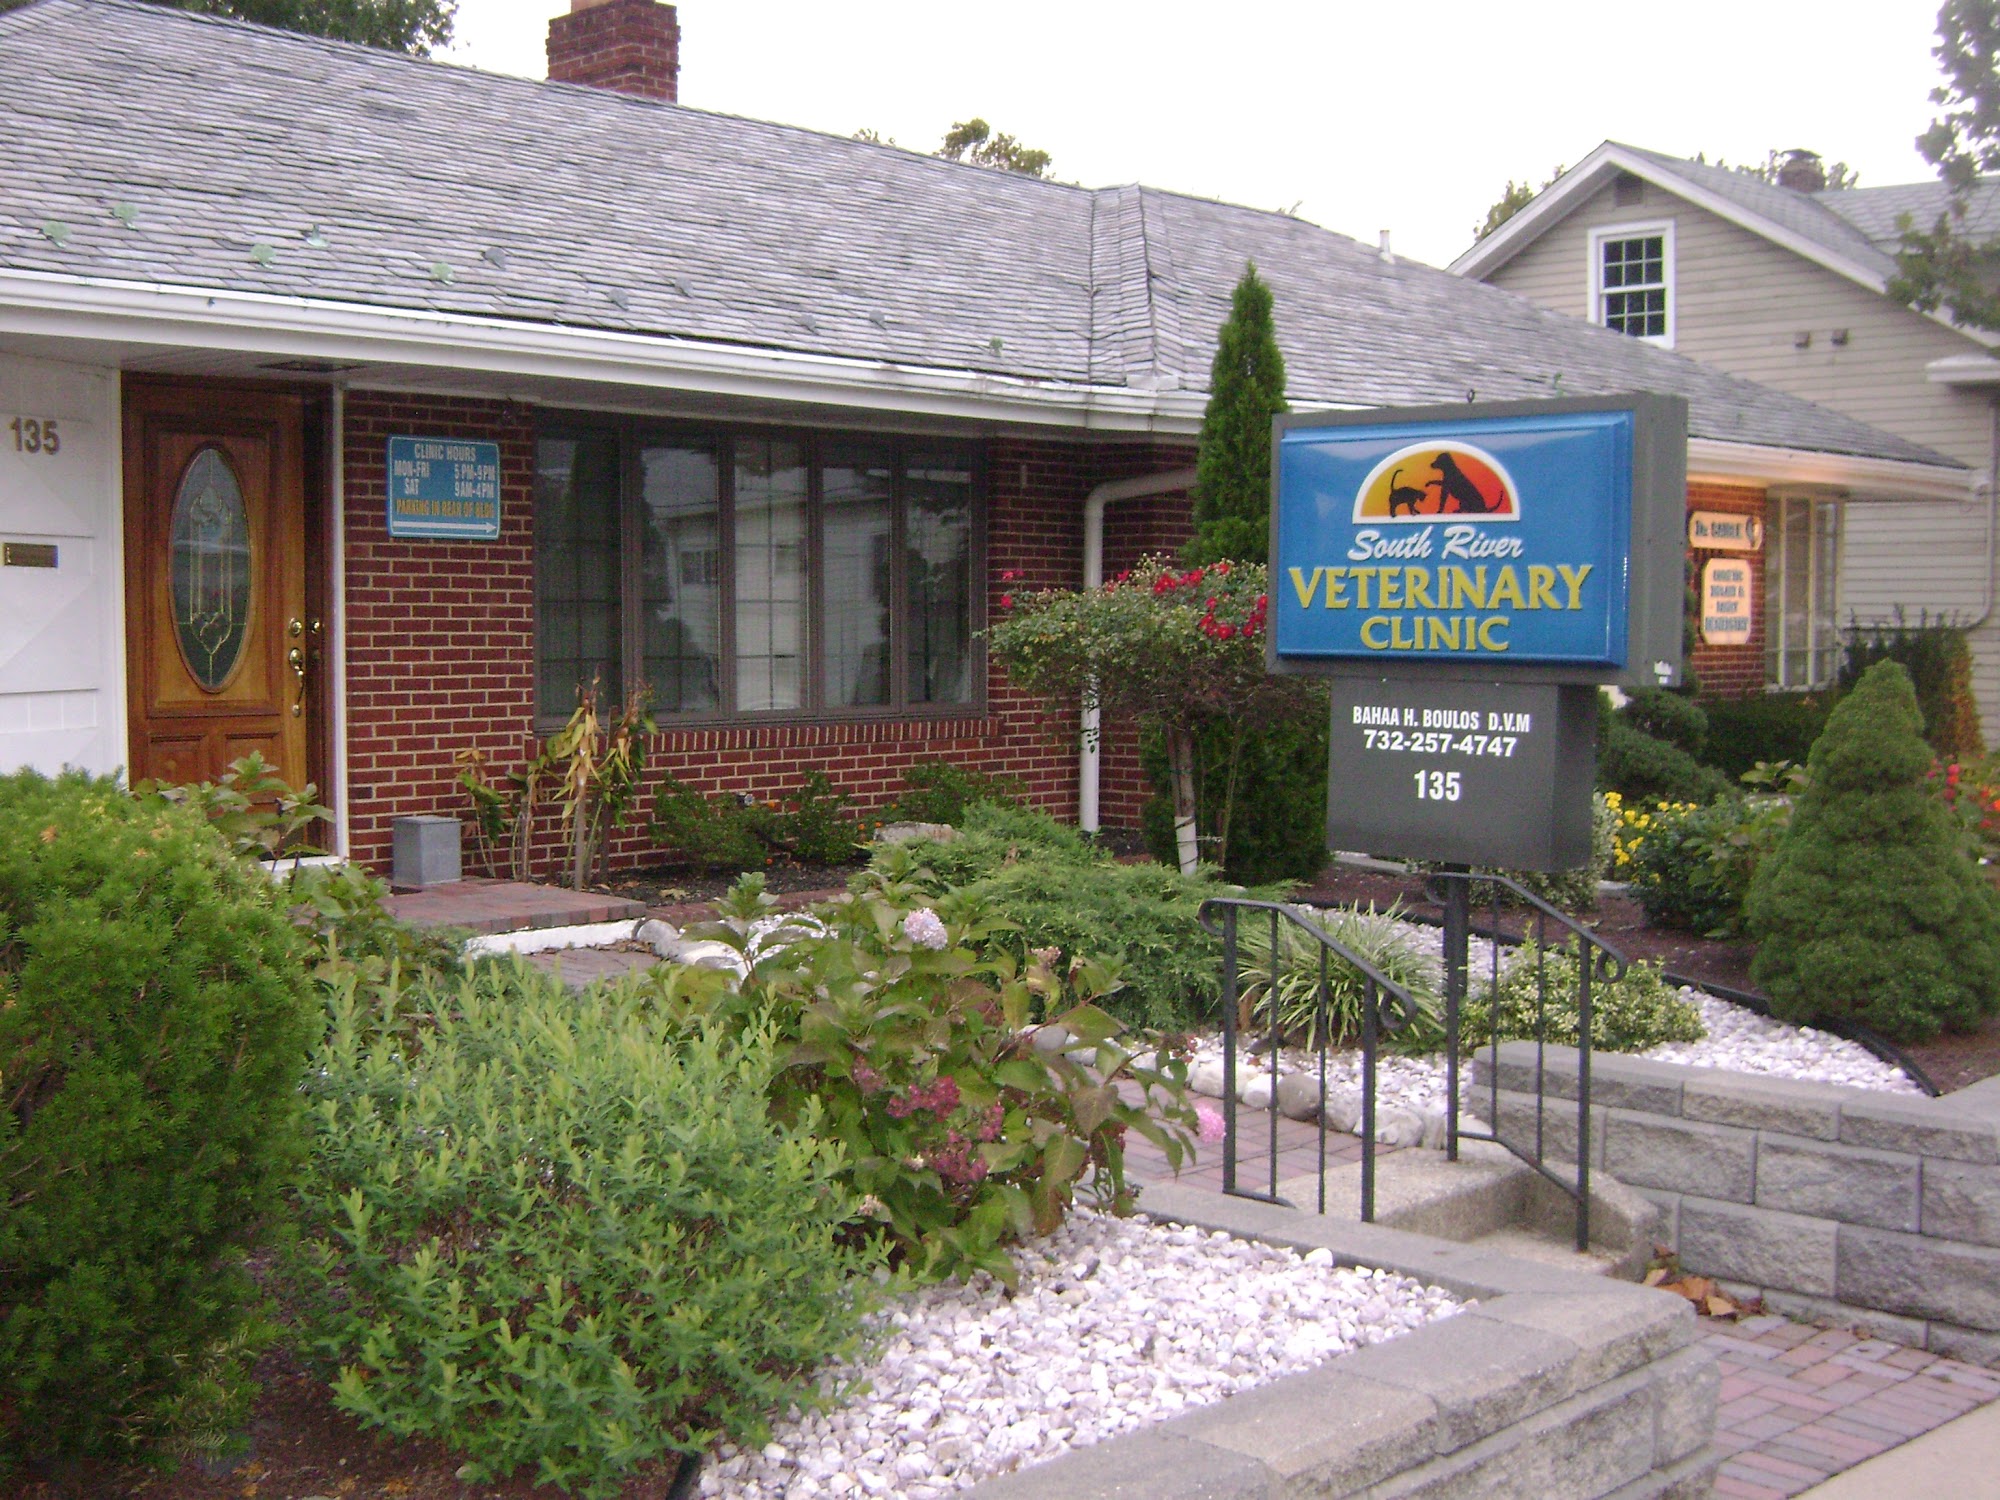 South River Veterinary Clinic